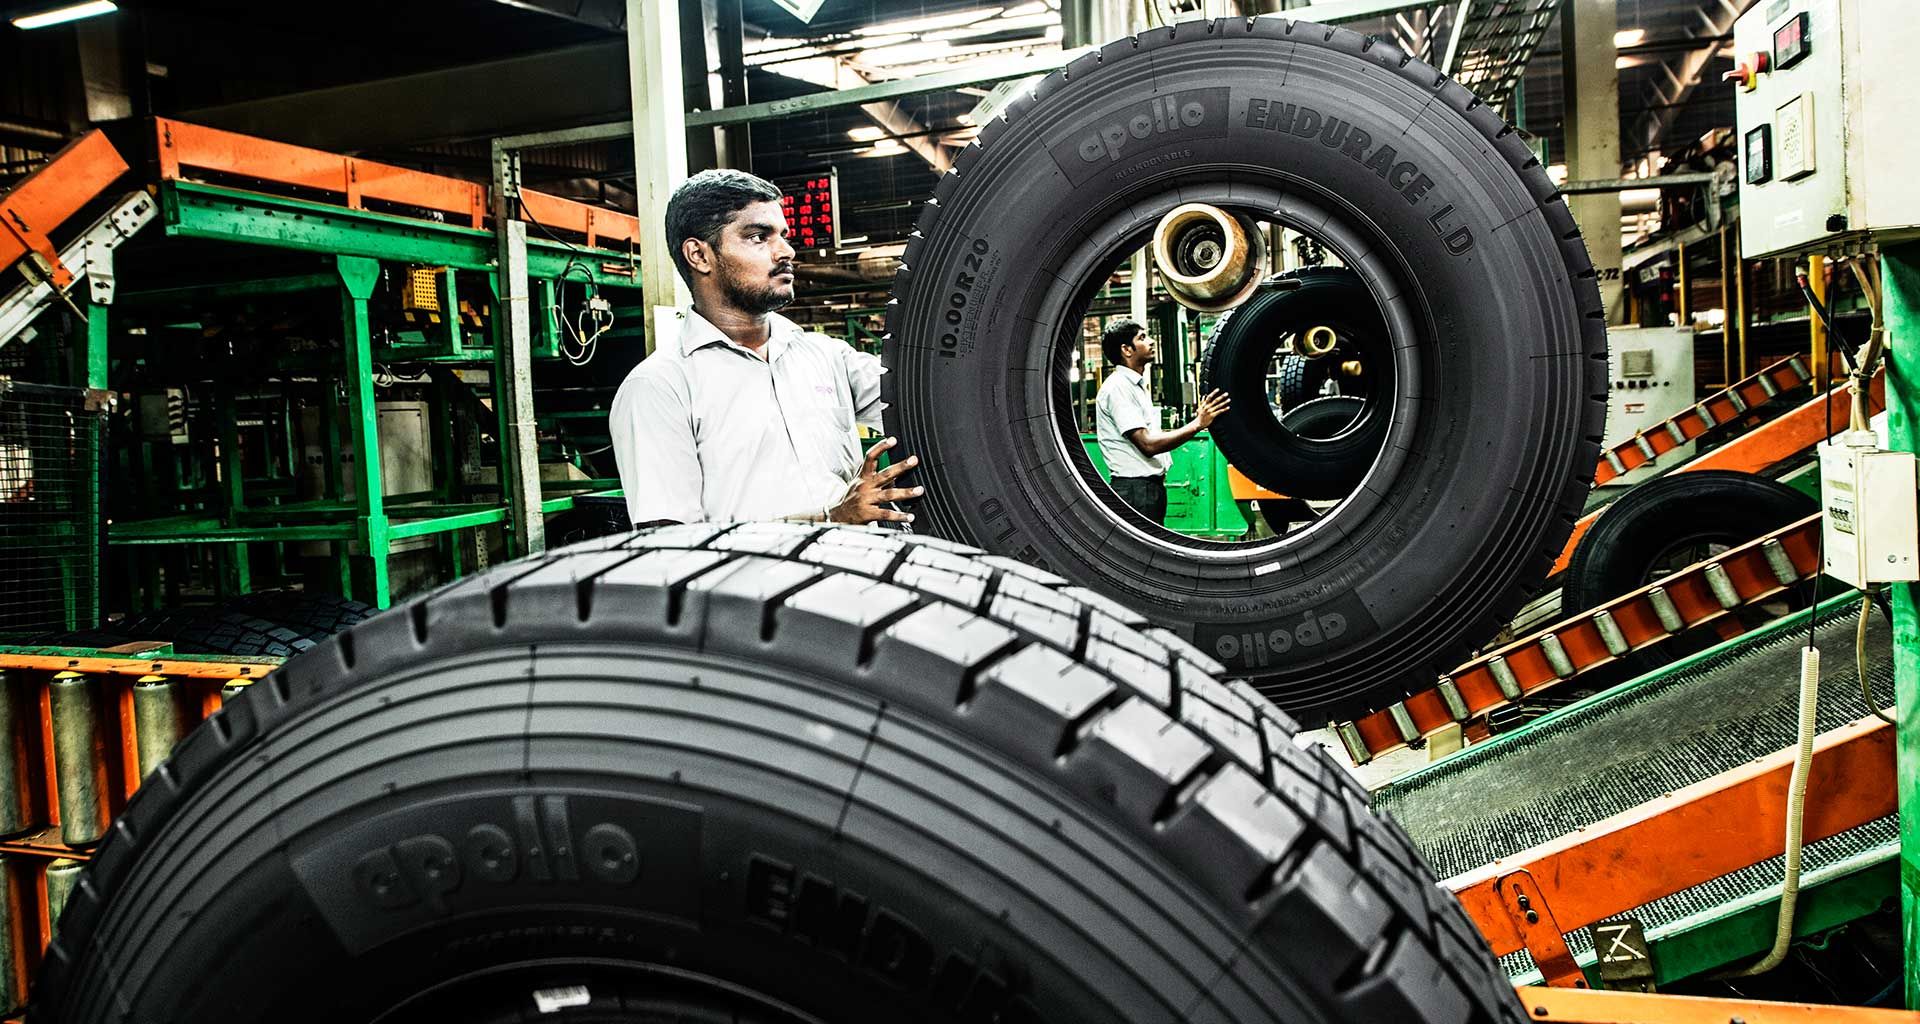 Apollo Tyres expects double-digit revenue growth in FY24